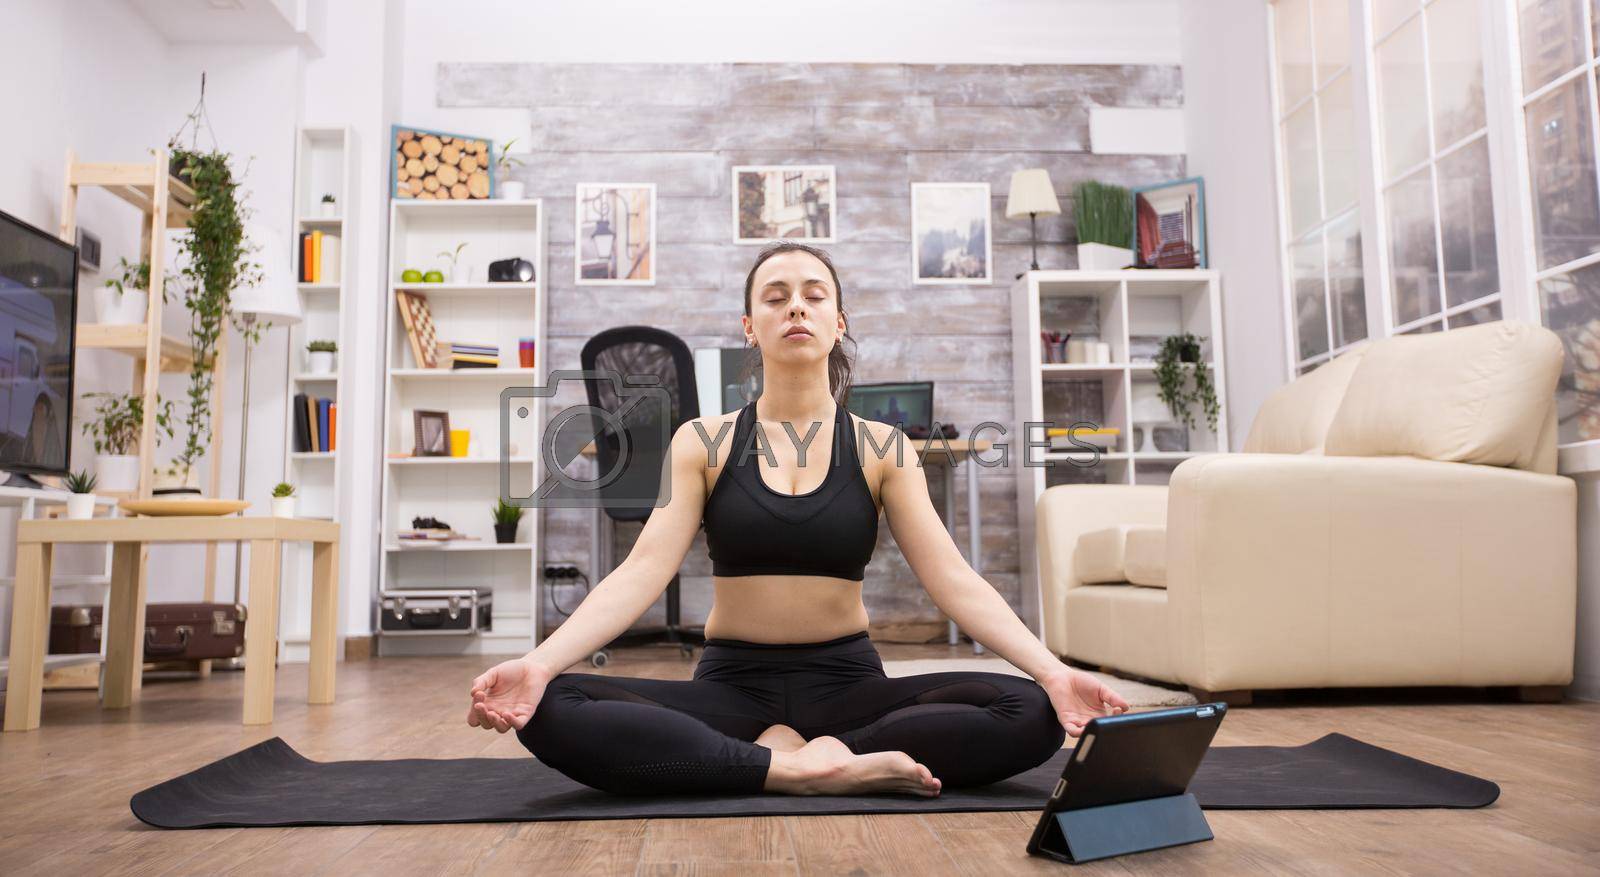 Tablet computer in front of young woman doing yoga pose sitting on mat in living room.